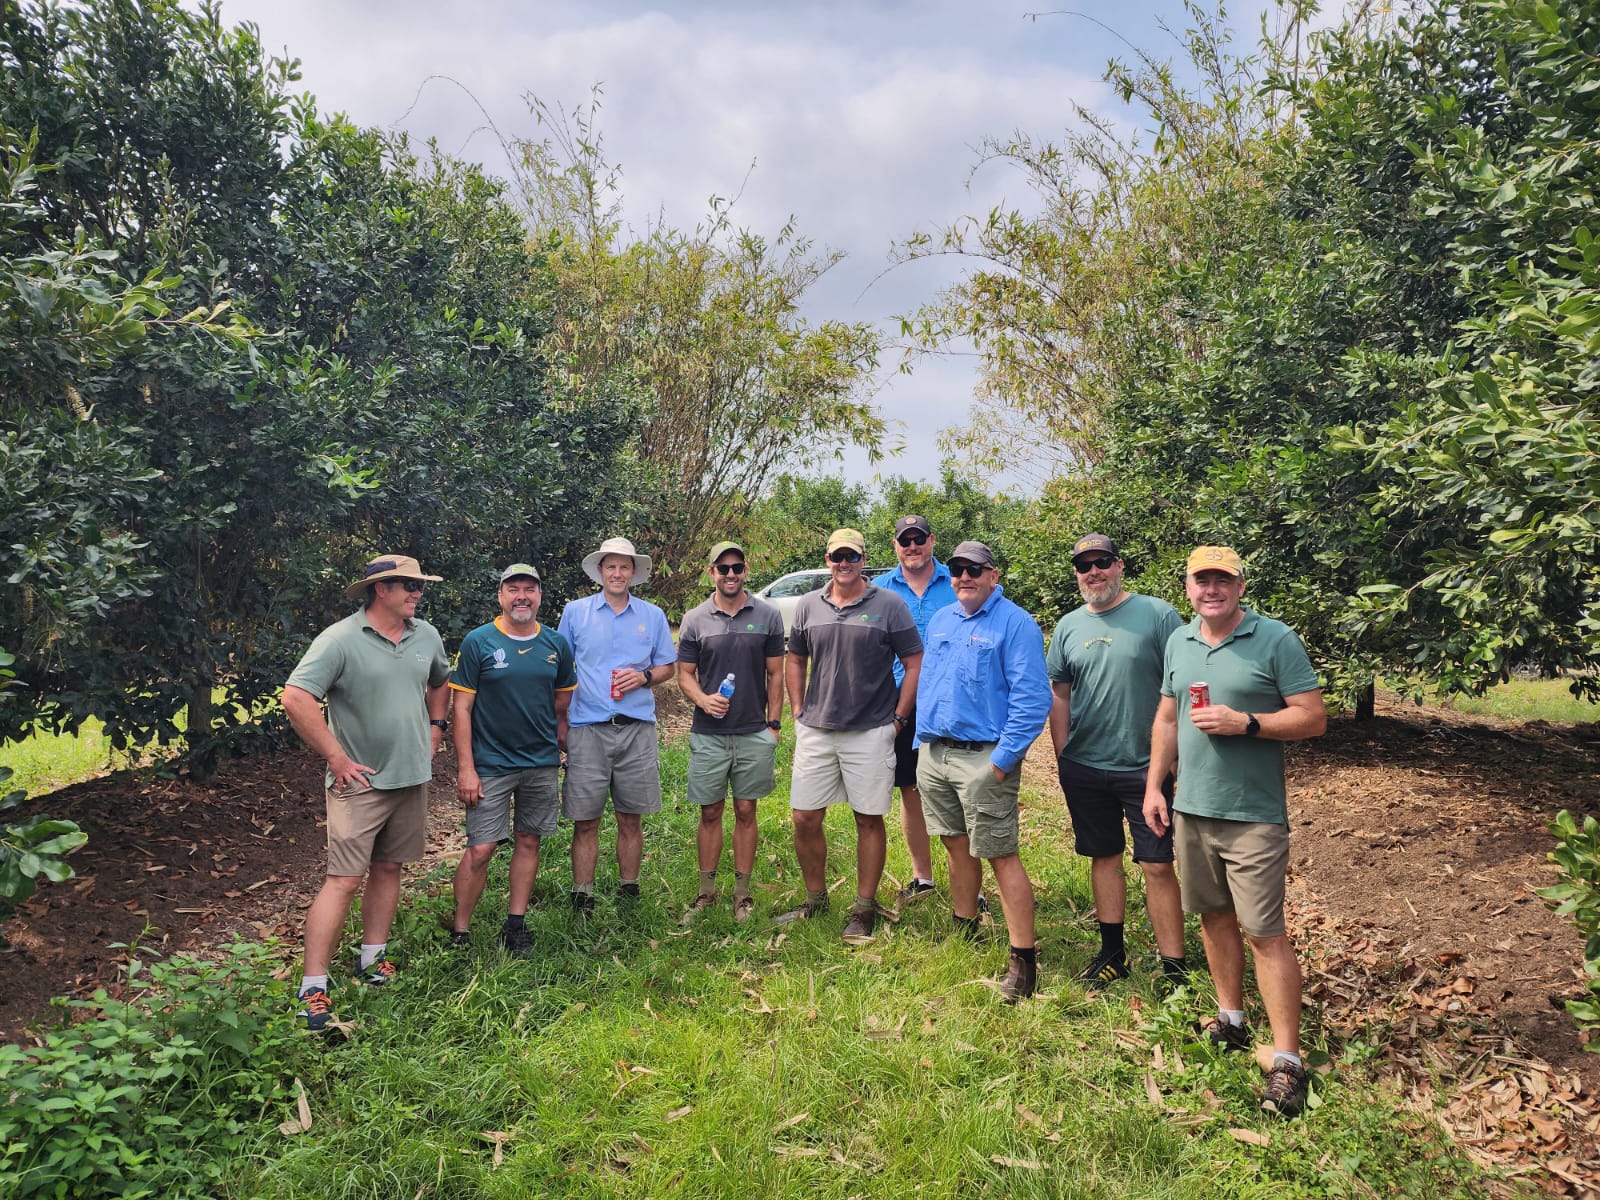 Nine men smile for the camera in the grassy strip between macadamia trees